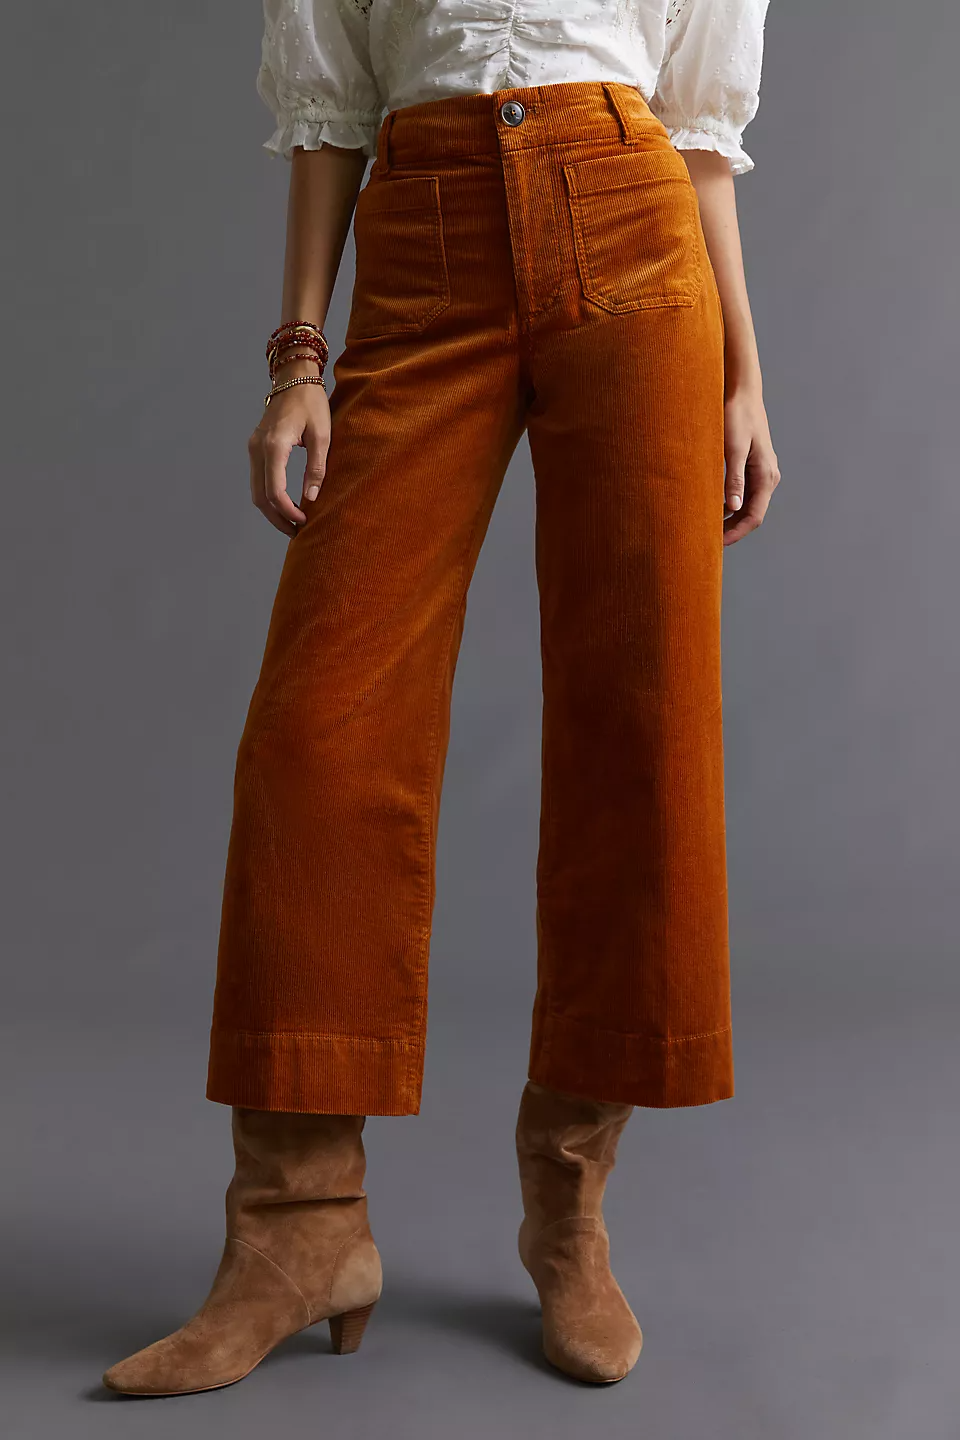 candice mcdonough recommends goddess wear corduroy pants pic